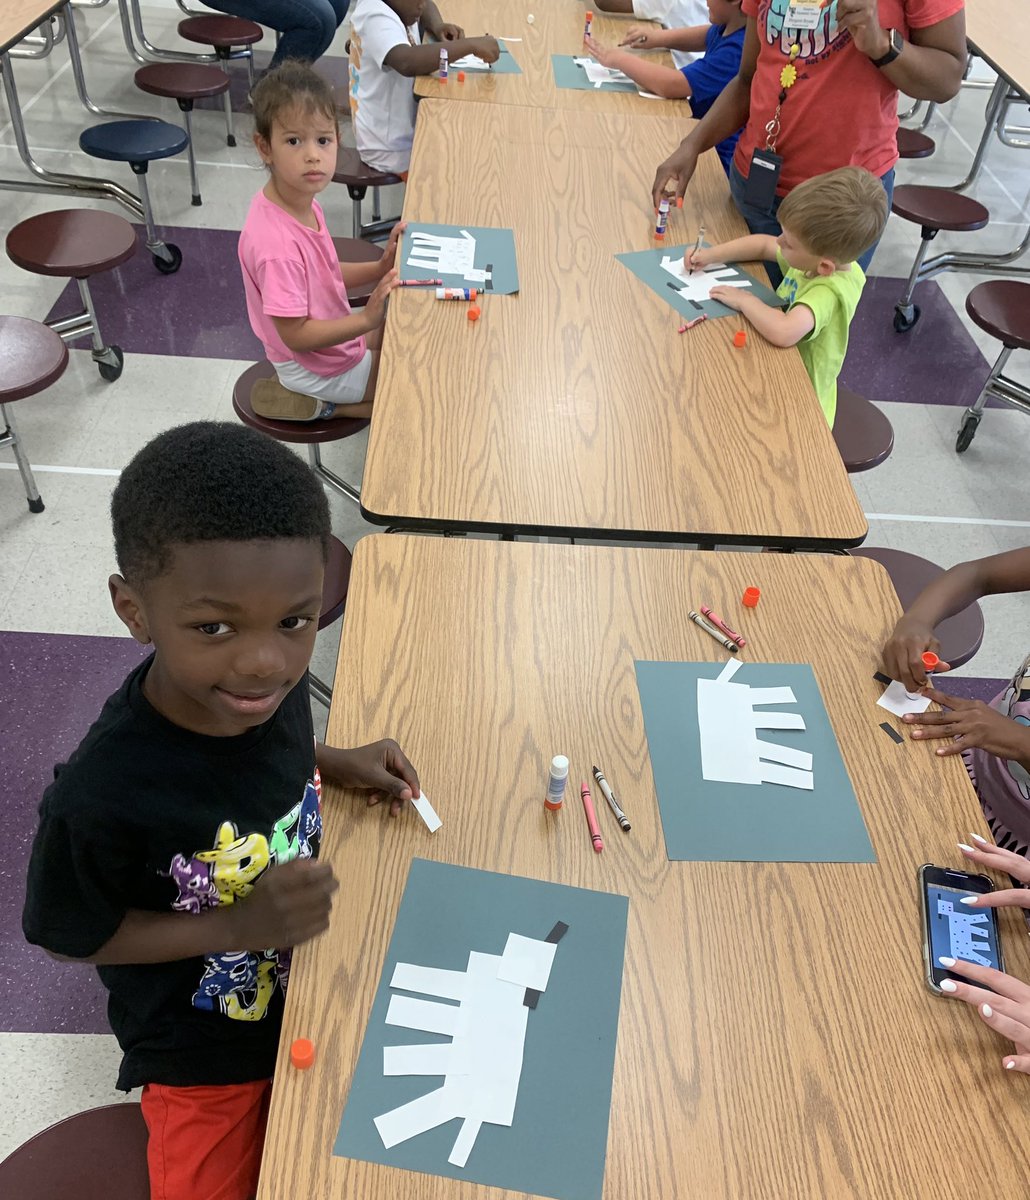 All hands on deck for hands on learning in our Summer Bridge After School program @HES_HCS. These Hornets are creative! #hamptonproud